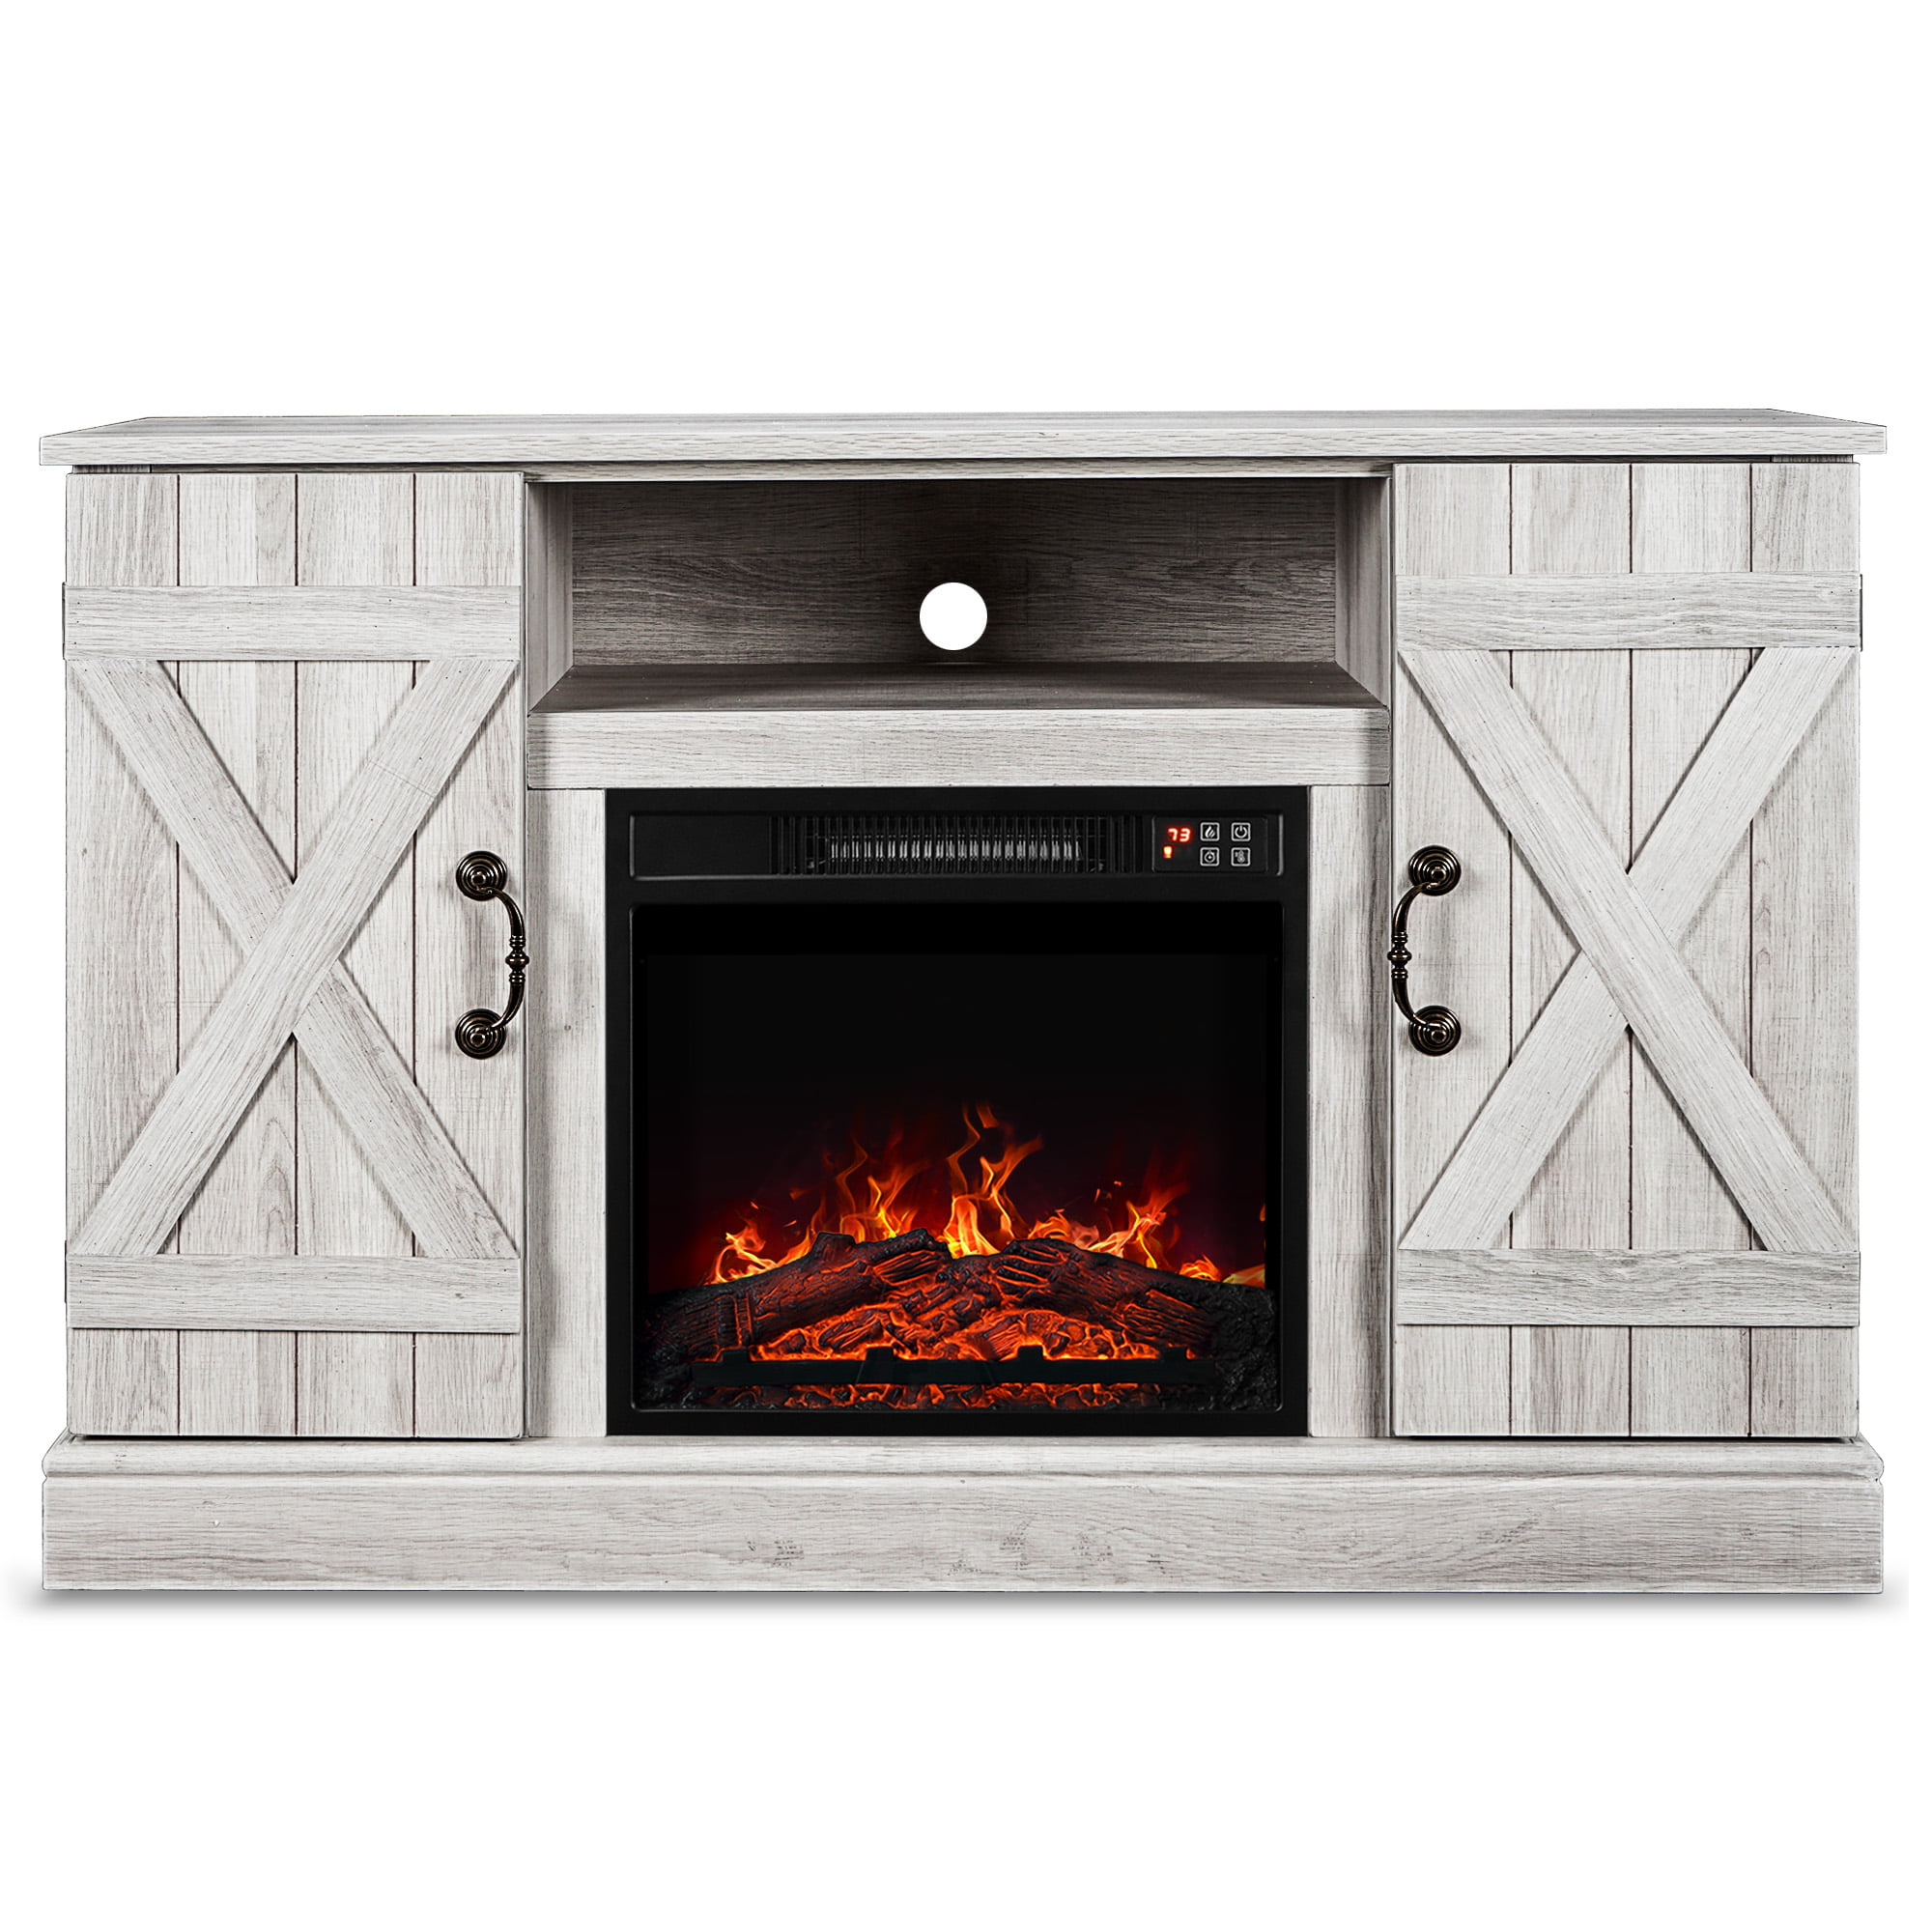 Belleze Infrared Electric Fireplace Tv, Belleze Fire Pit